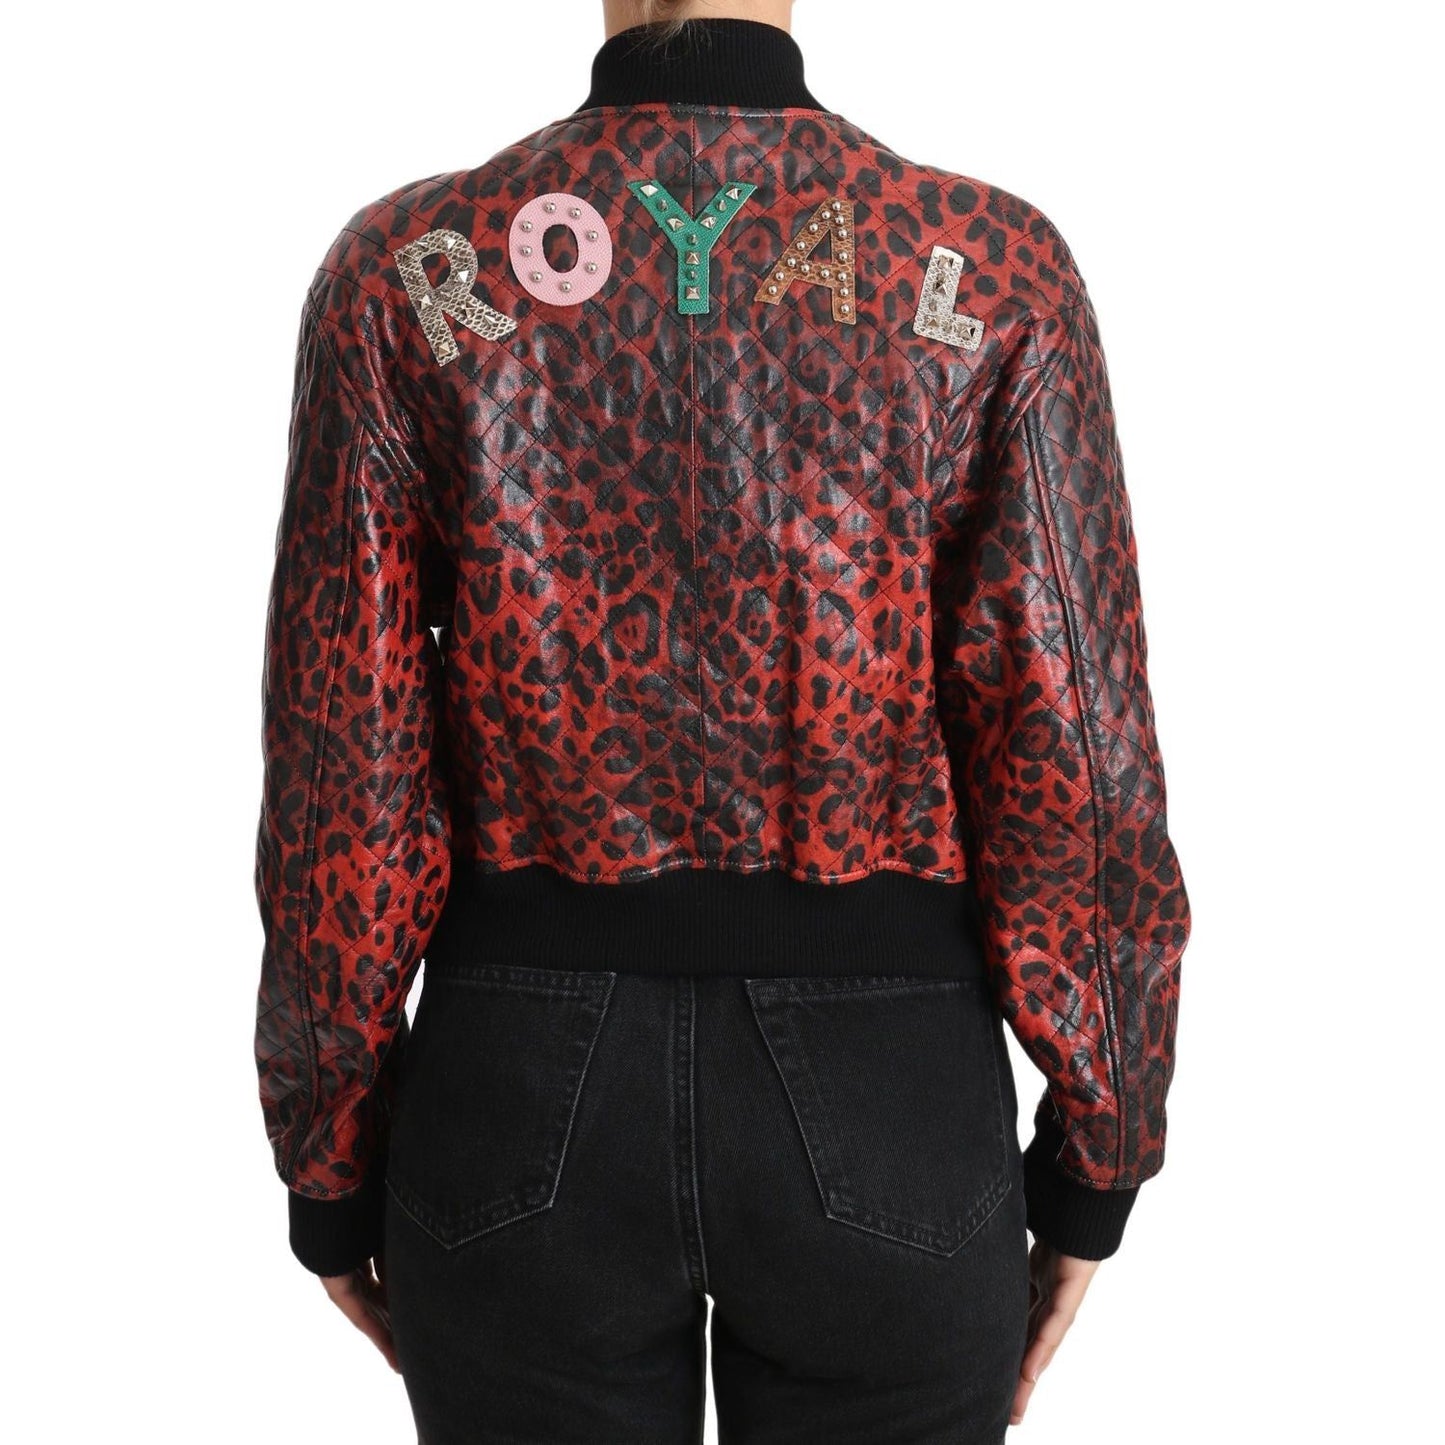 Dolce & Gabbana Red Leopard Bomber Leather Jacket with Crystal Buttons Coats & Jackets red-leopard-button-crystal-leather-jacket